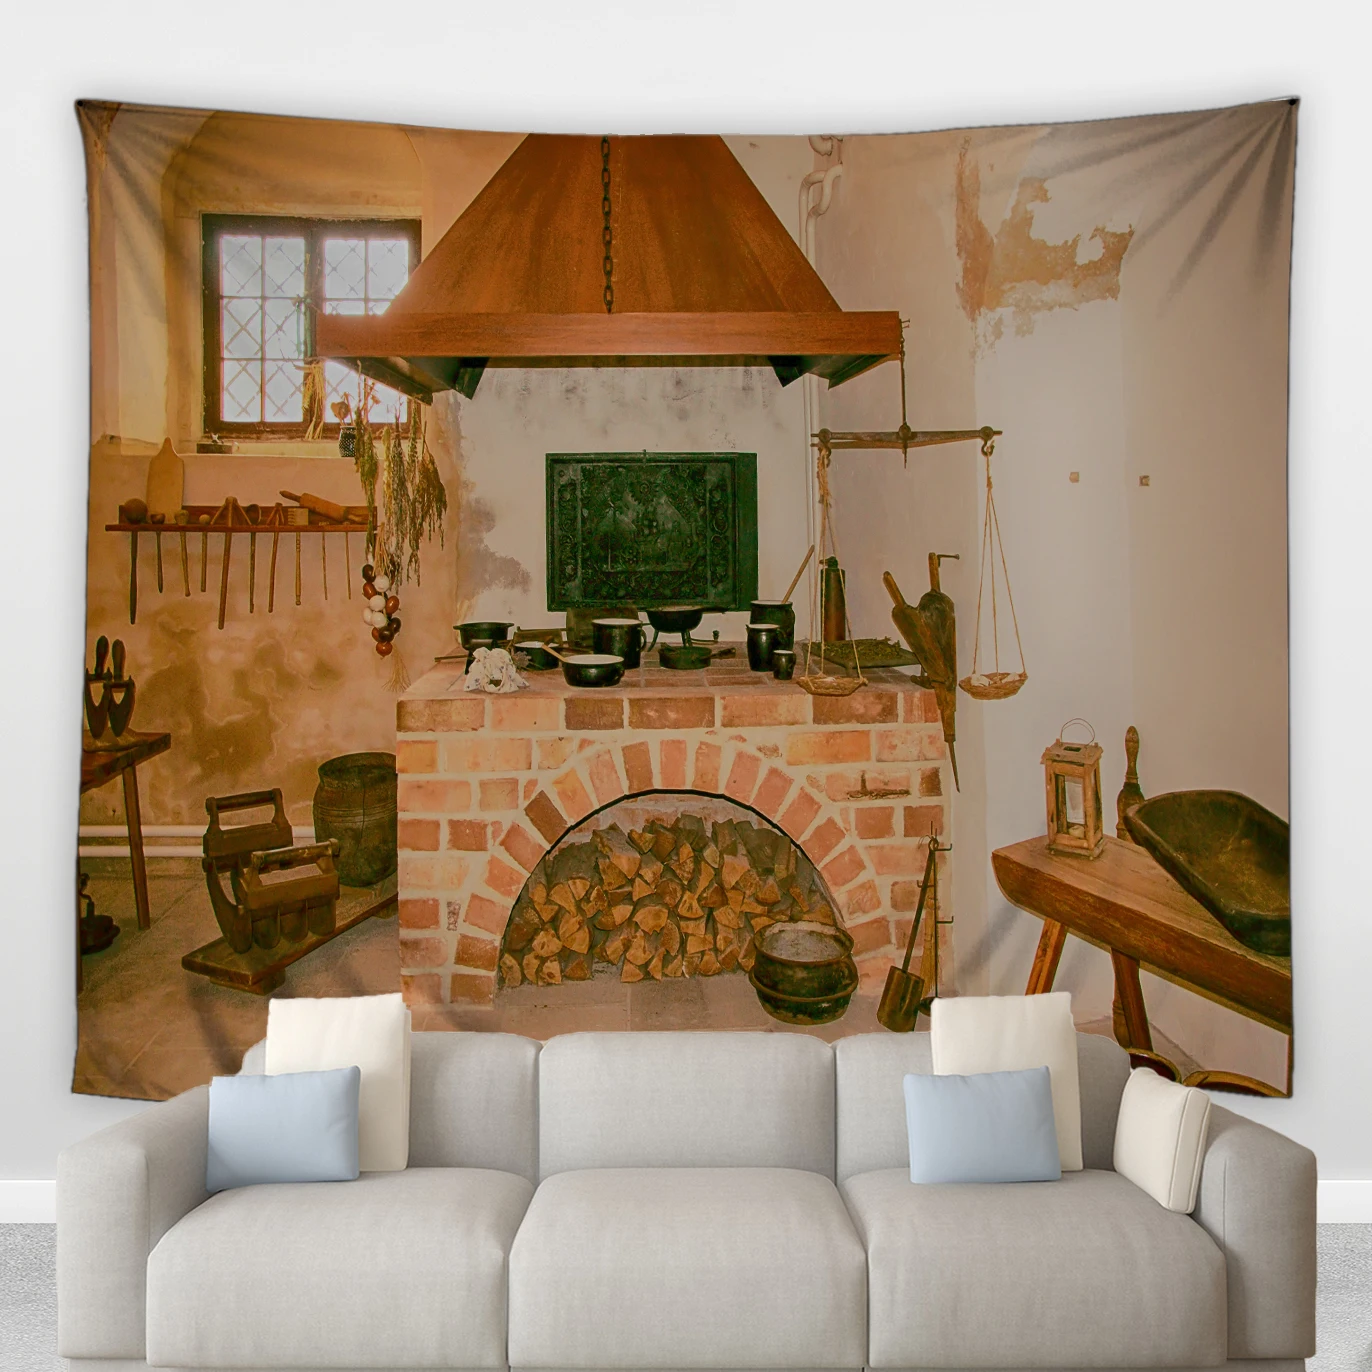 

Retro Vintage Fireplace Hippie Big tapestry Winter Indoor Scene Pattern Living And Dinning Room Patio Decor Wall Hanging Blanket